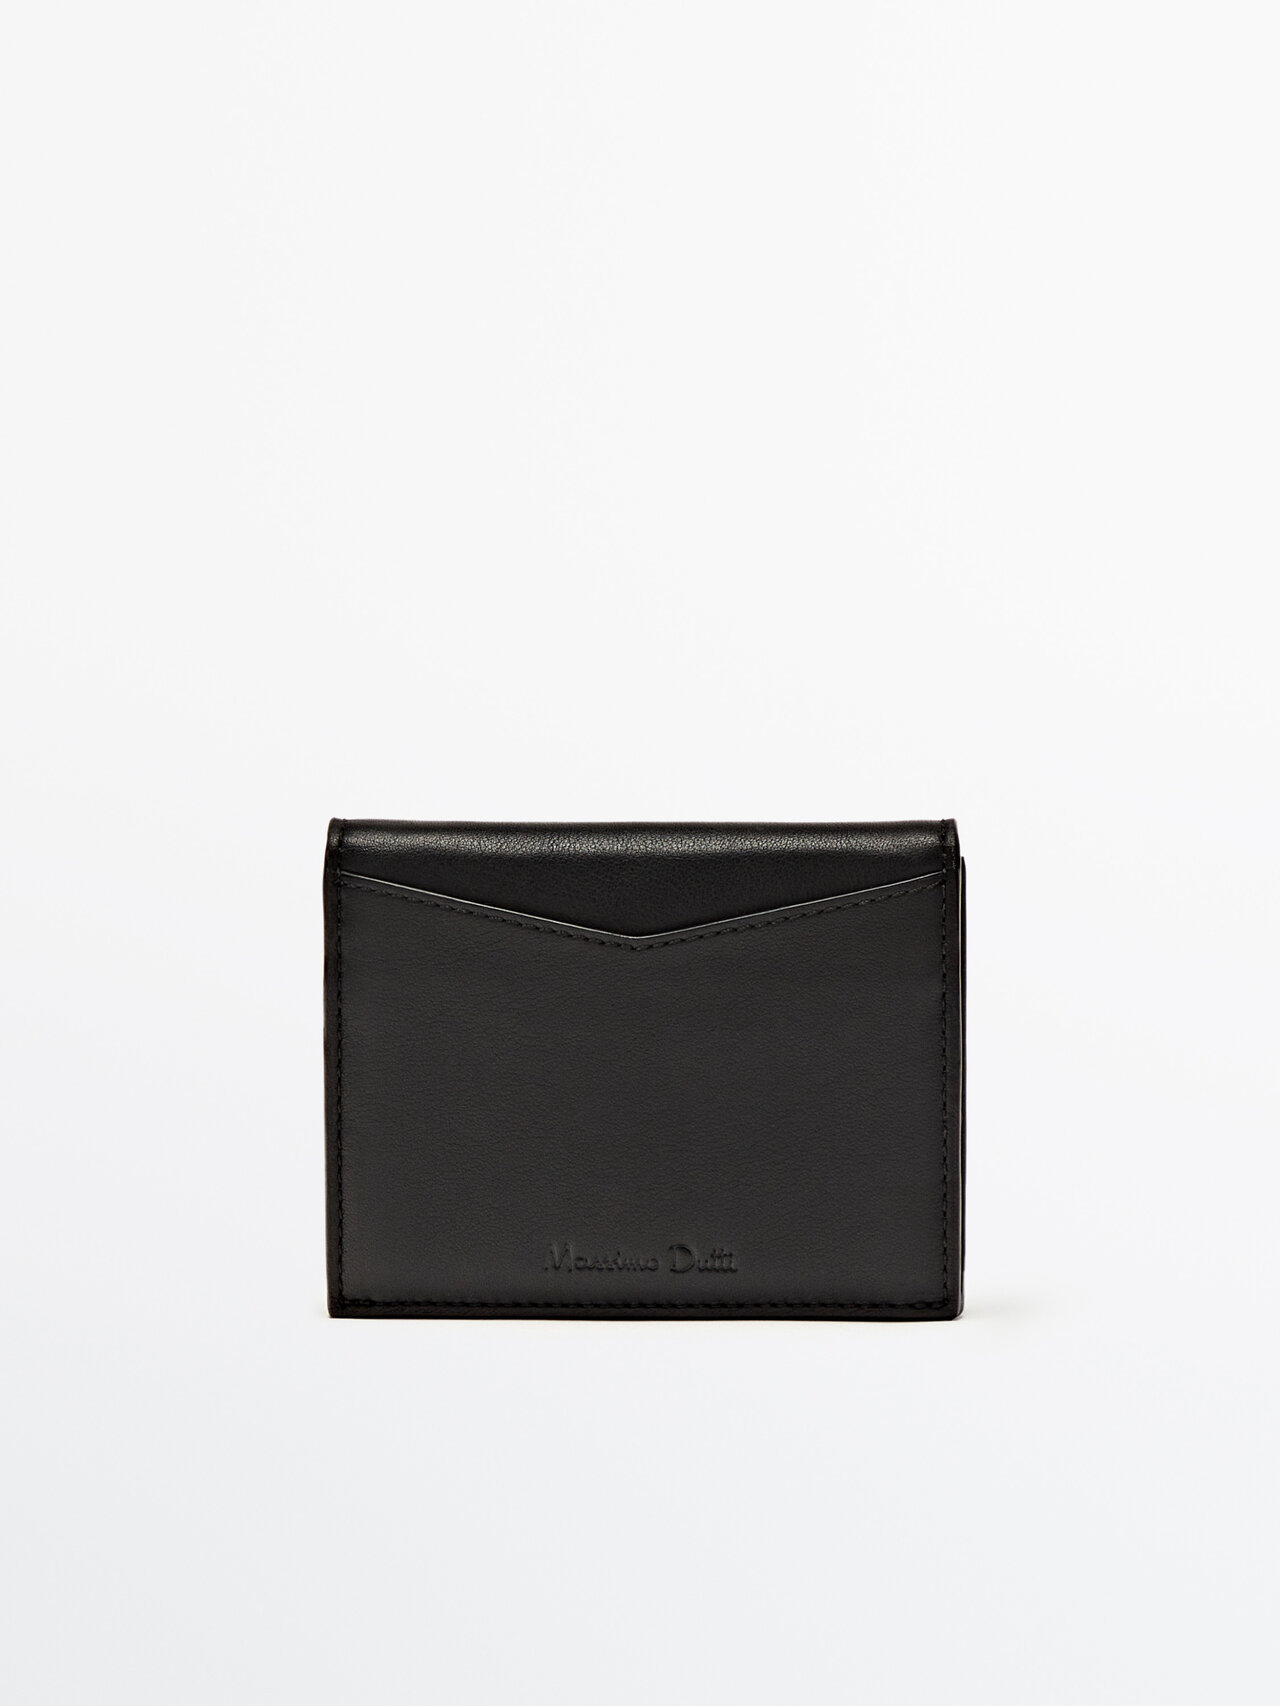 Massimo Dutti Leather Wallet In Black